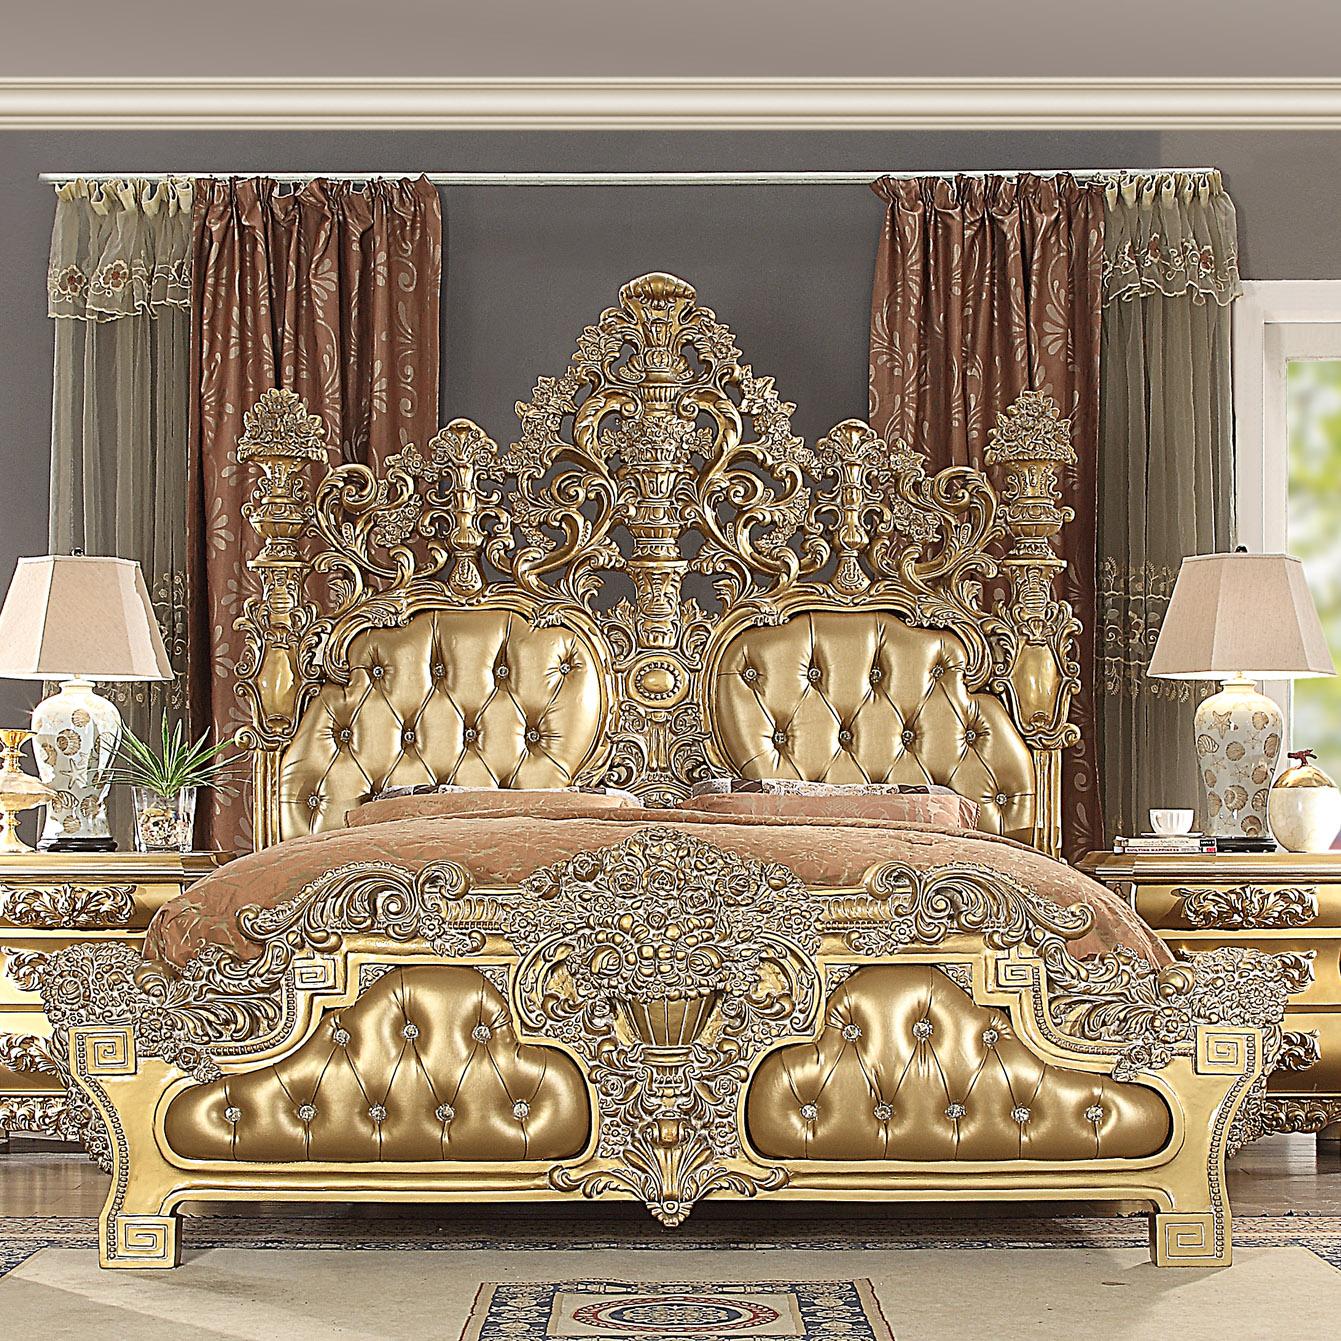 Traditional Panel Bed HD-8016 HD-8016 CK BED in Rich Gold, Gold Finish Leather